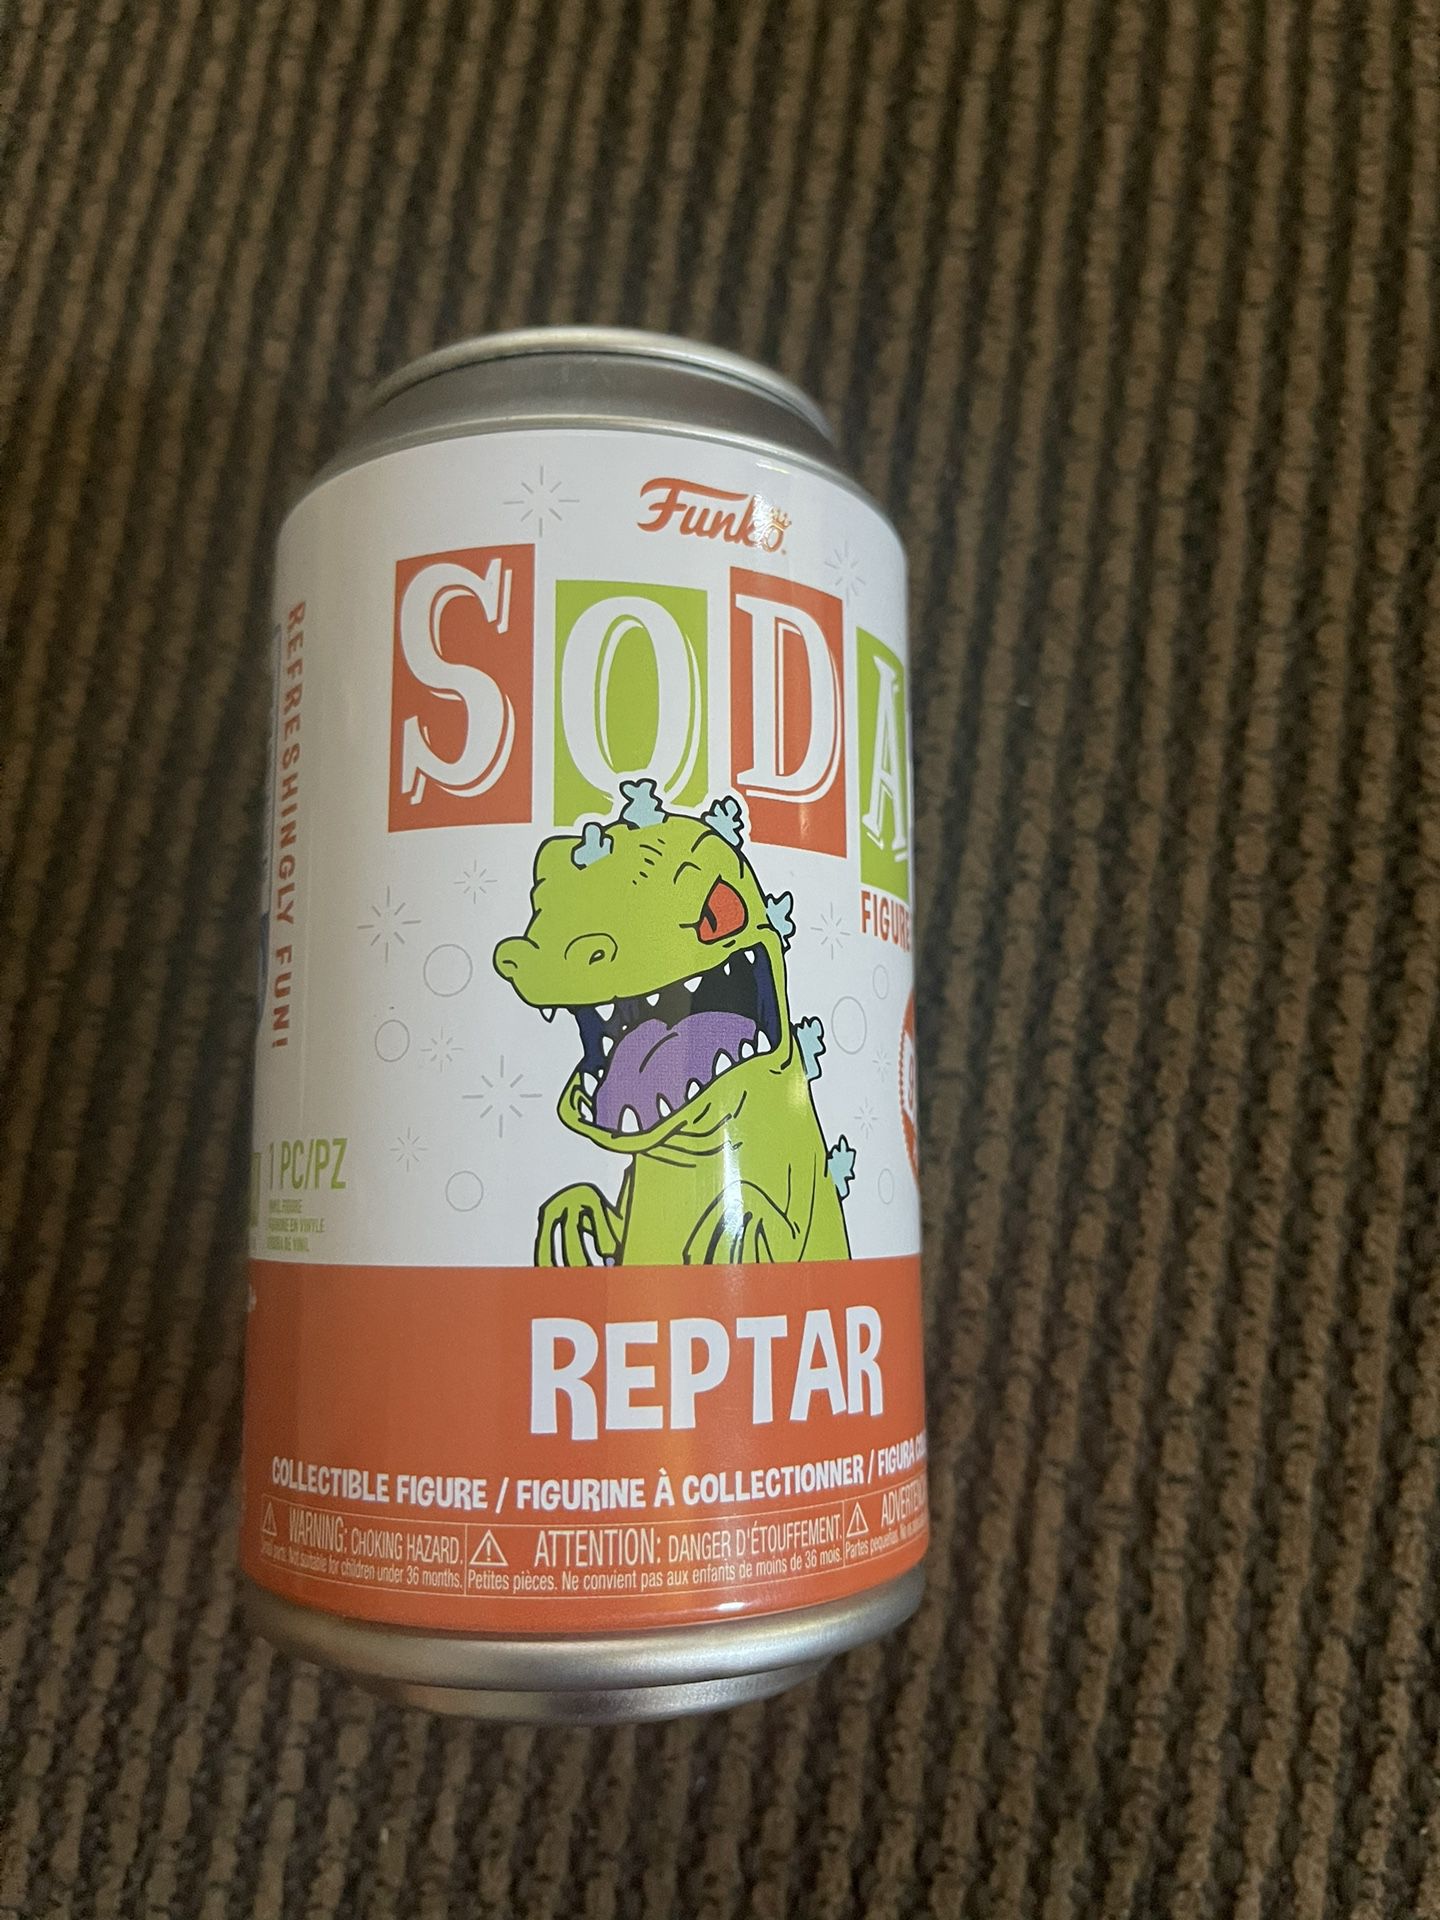 SDCC shared Sticker Summer Convention Limited Edition Reptar